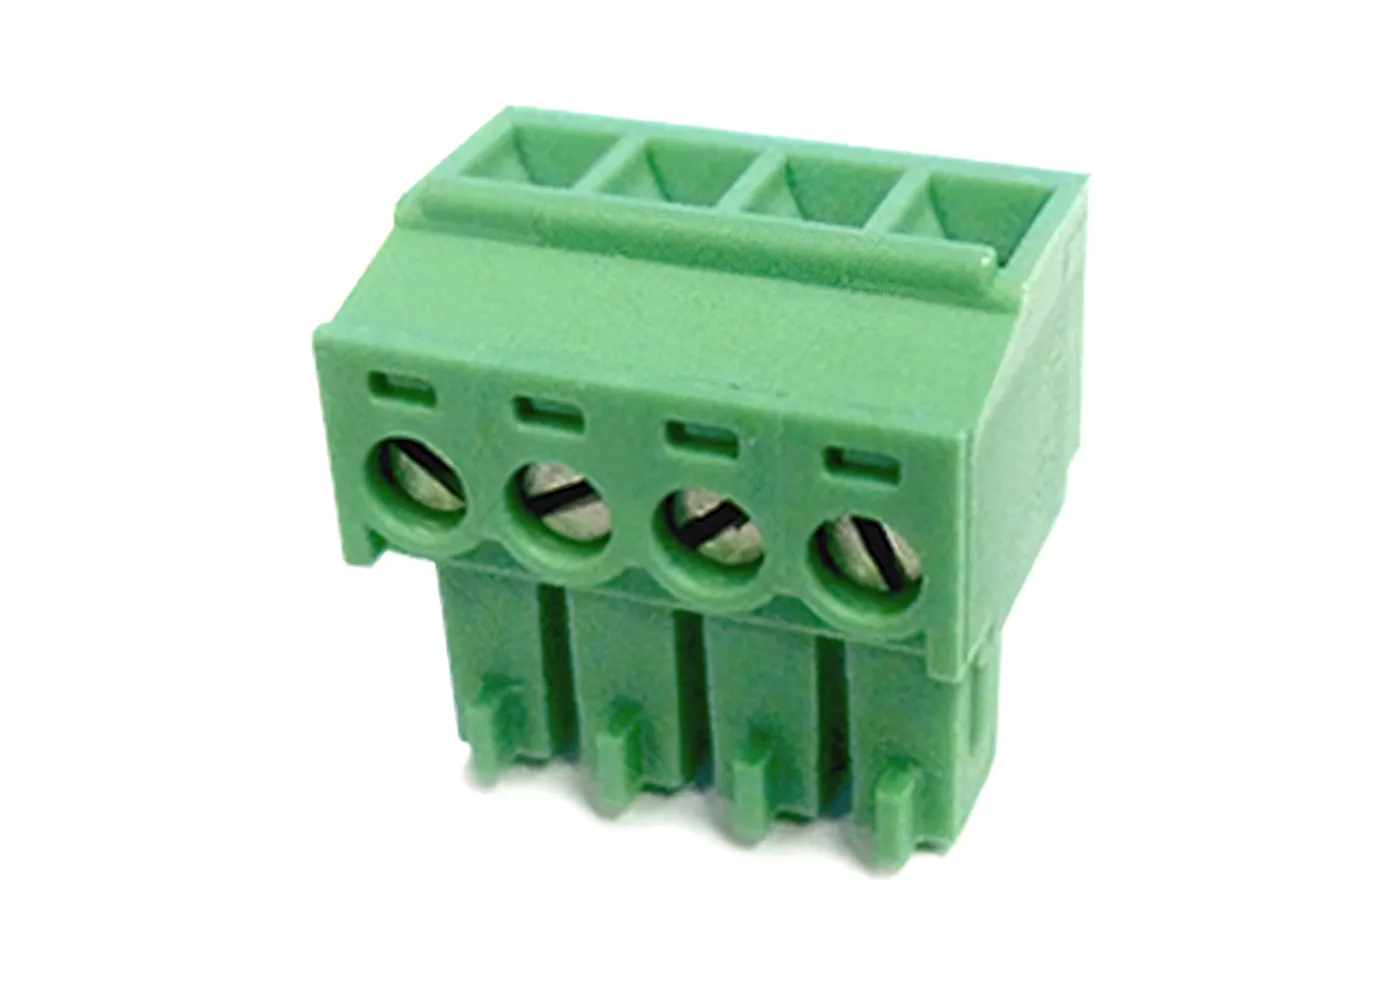 4 Position I/O Connector<br/>

<span class="clsSpnProdMdls">For HMI +PLC (HMCs) Only</span>